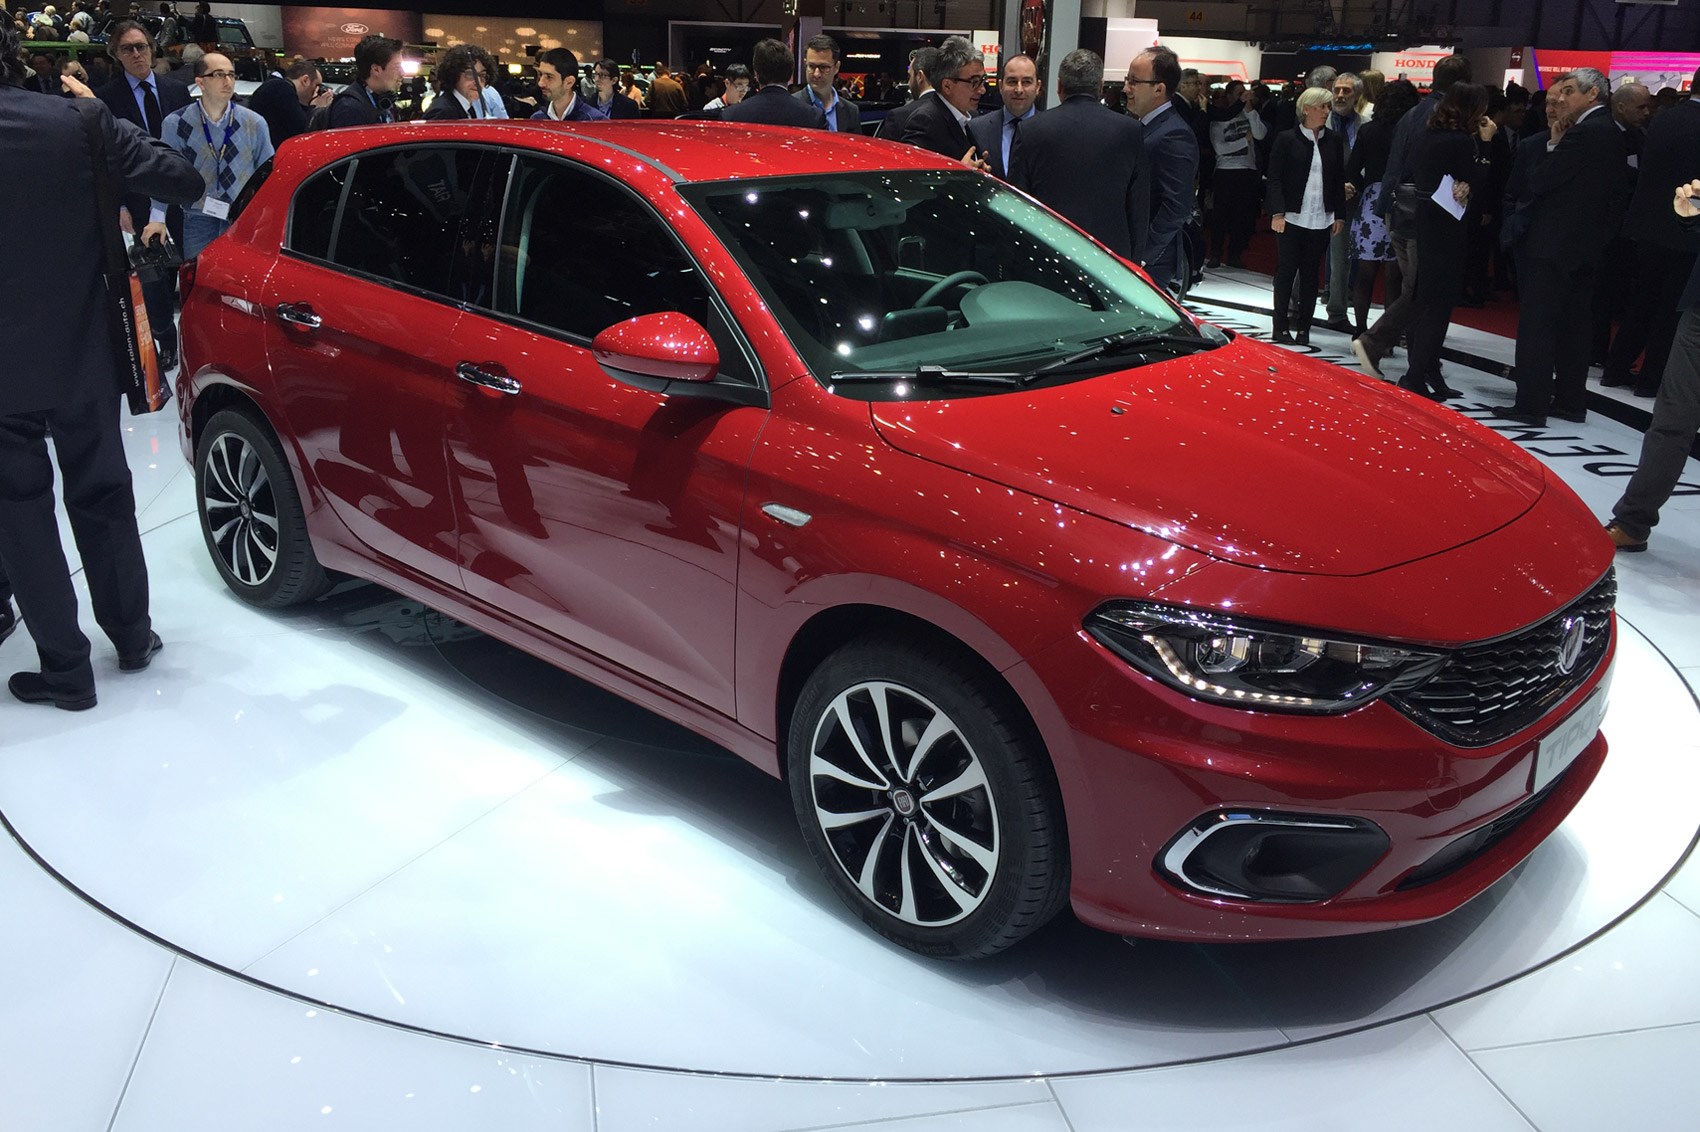 New Fiat Tipo Sport Is The Compact's All-Show And No-Go Range